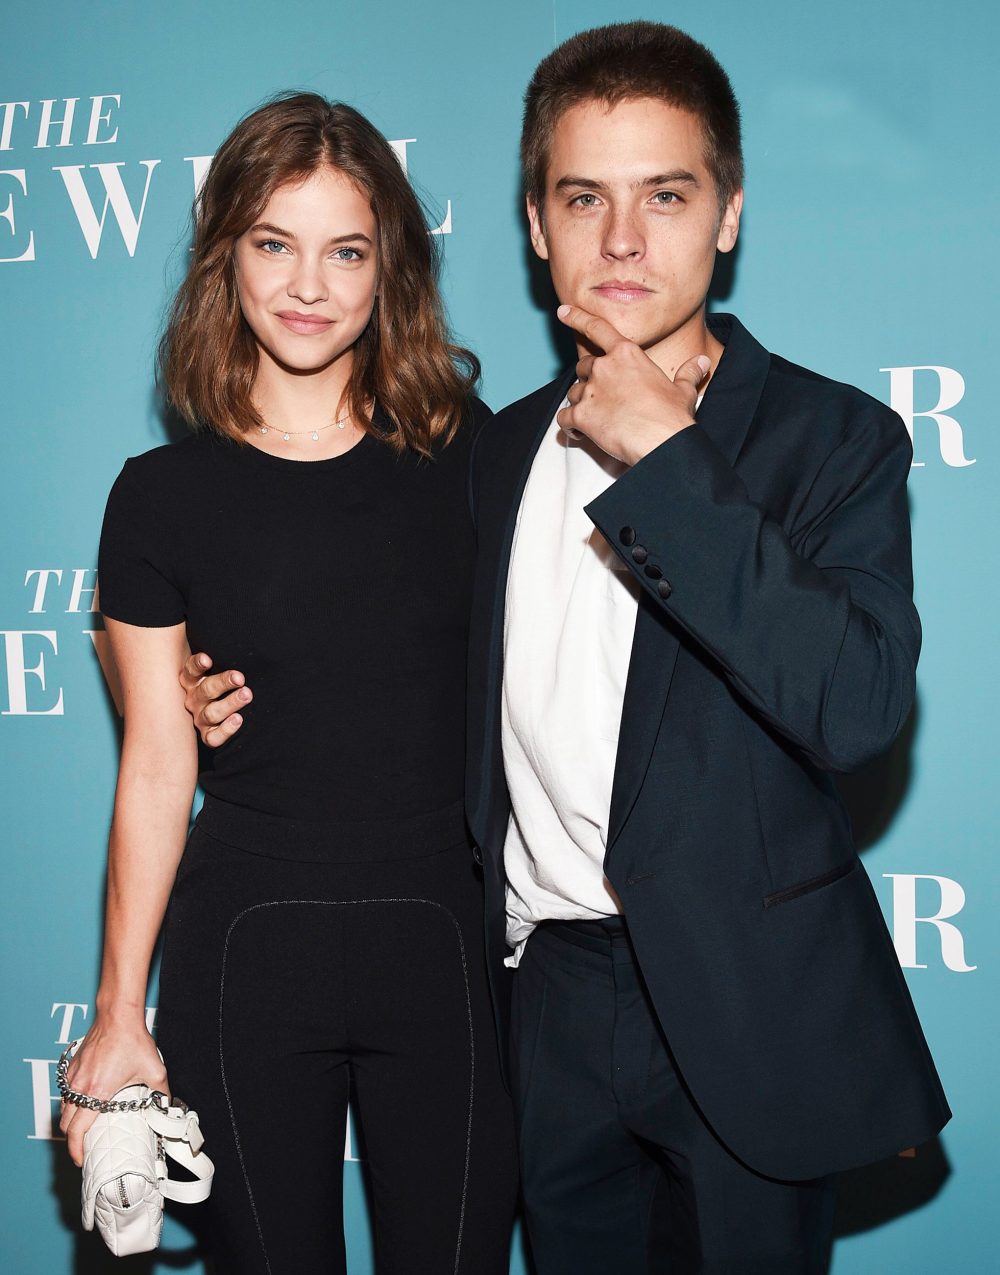 Barbara Palvin and Dylan Sprouse July 8, 2019